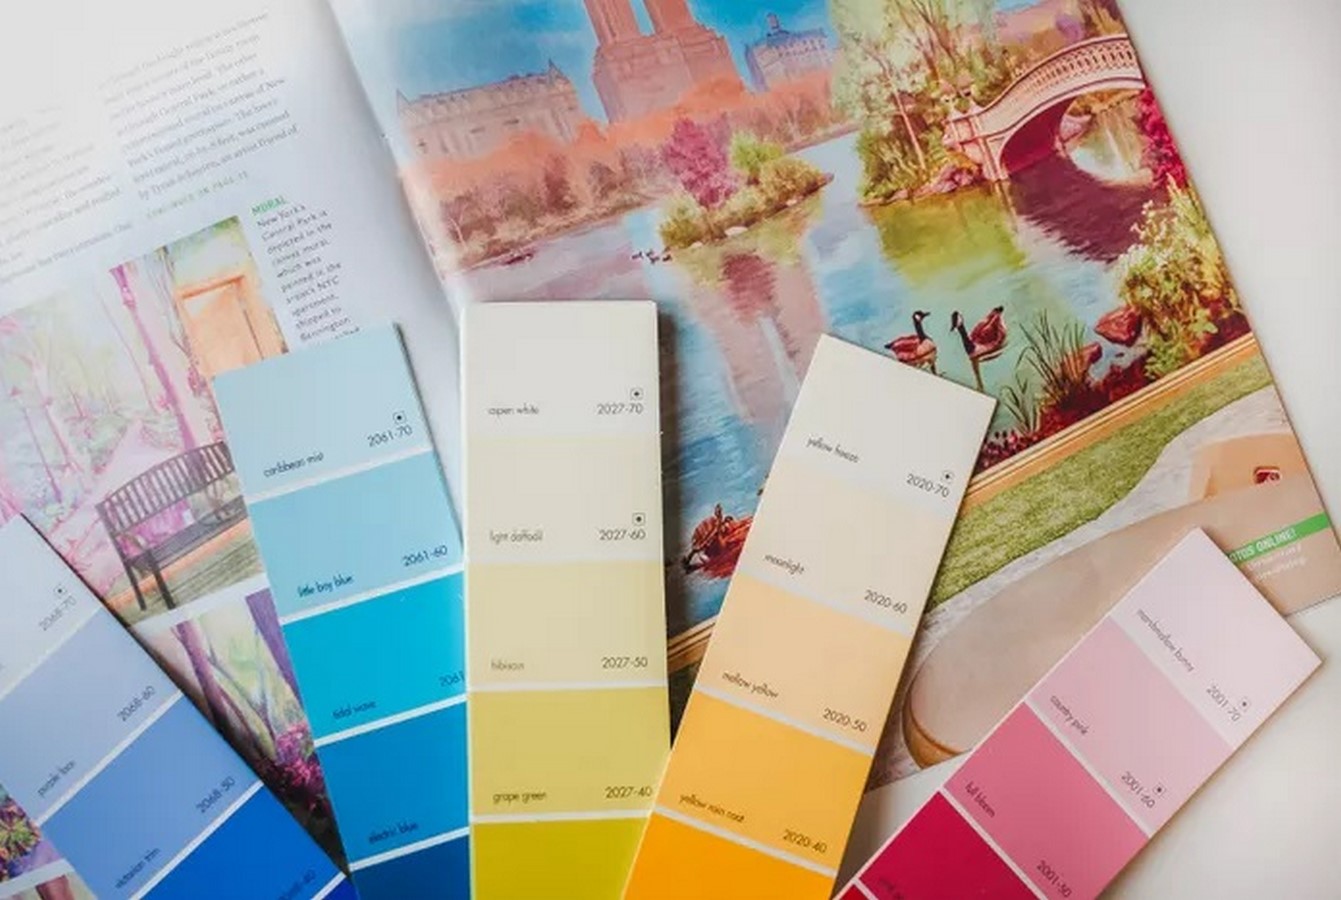 How to select the right color scheme for your home - Sheet2